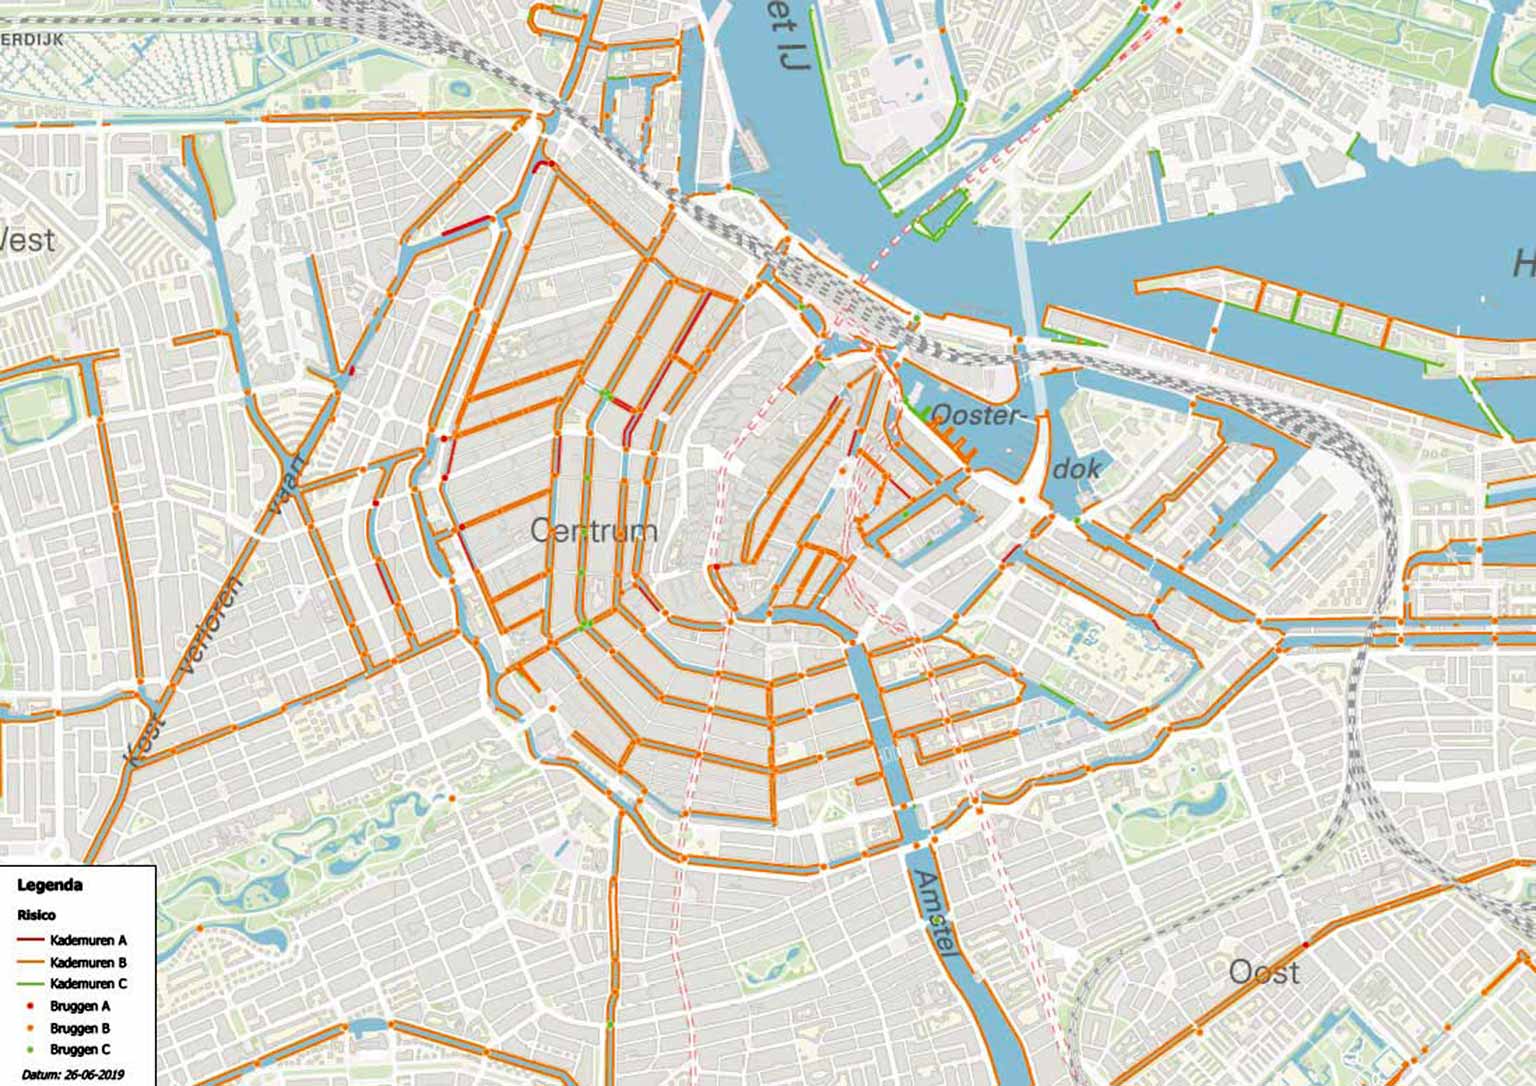 Map showing weaker Amsterdam canal quay walls (2019)